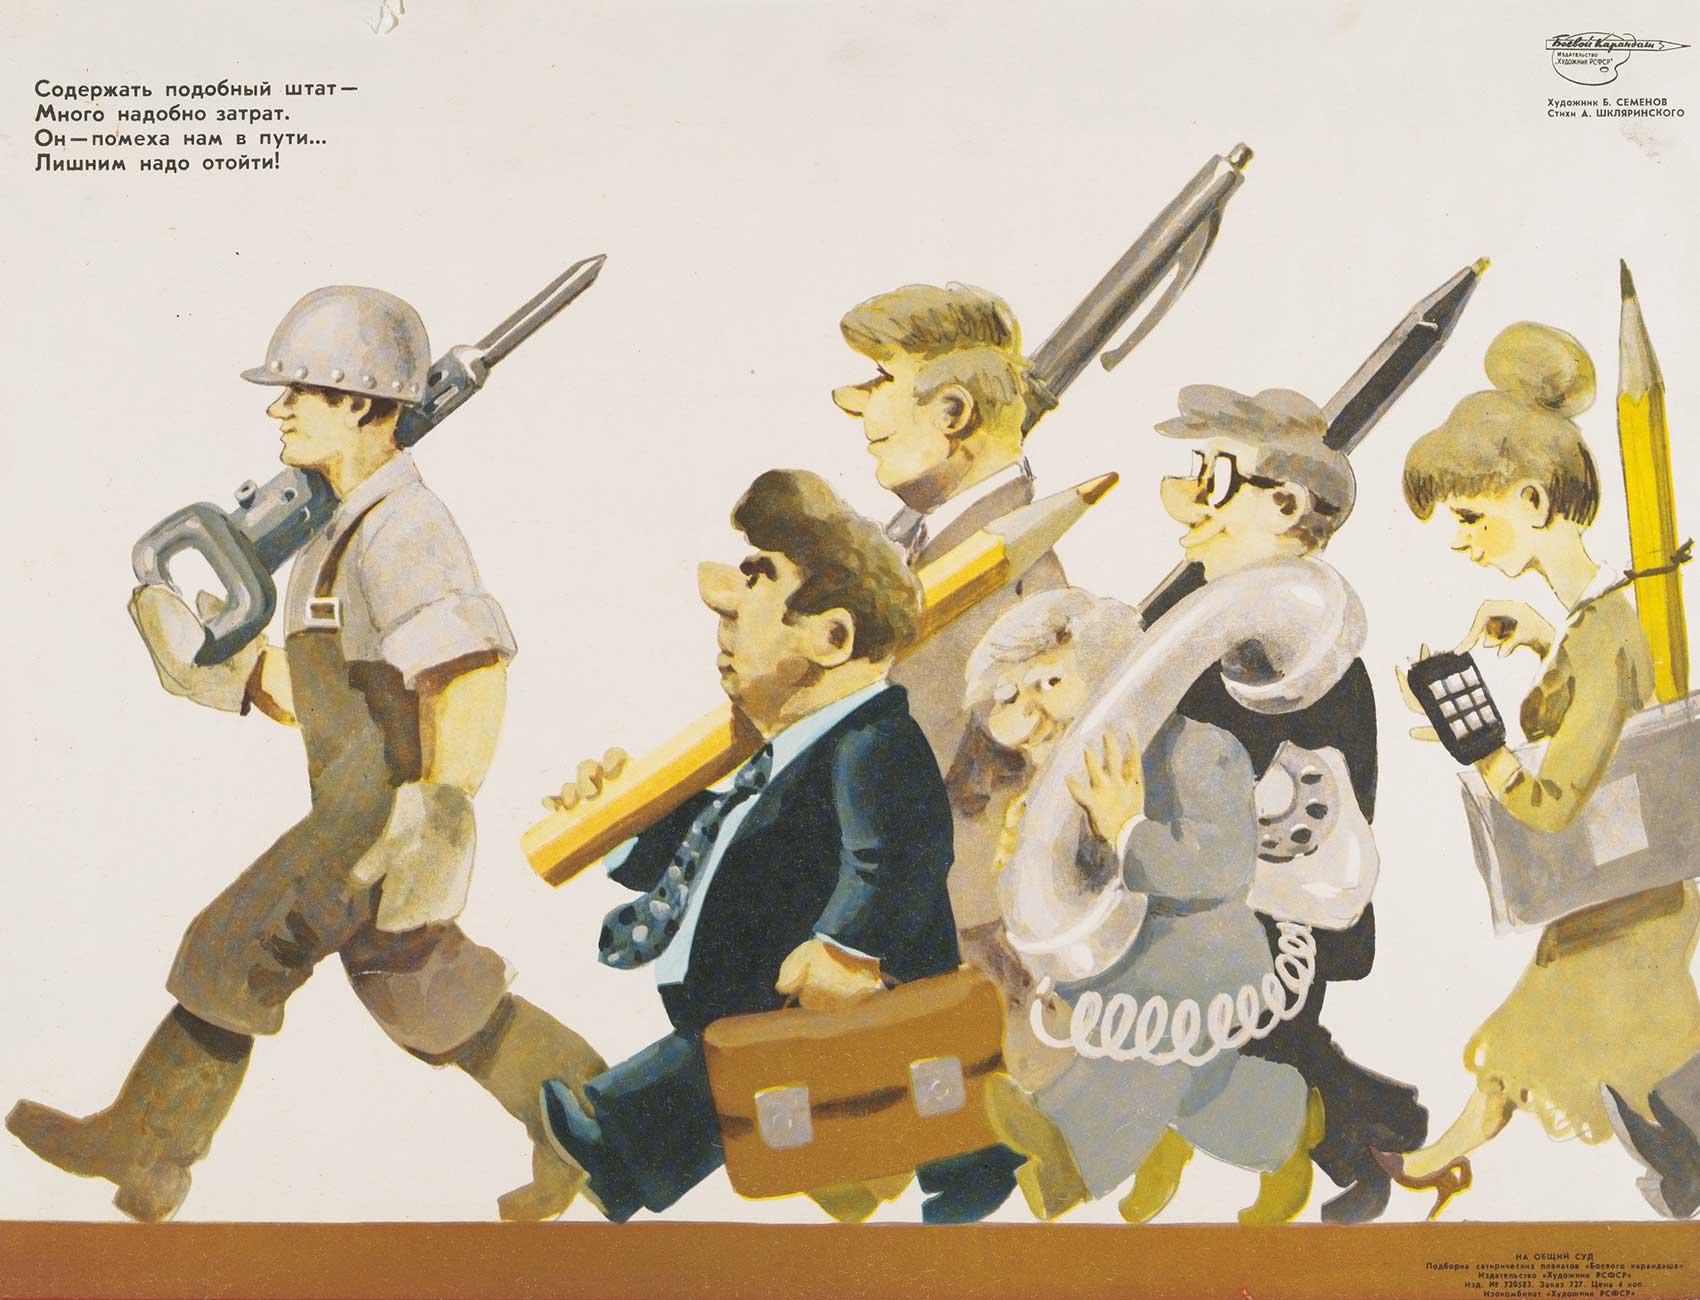 Cartoon showing an group of office workers with giant pencils and briefcases following a factory worker who carries a power tool